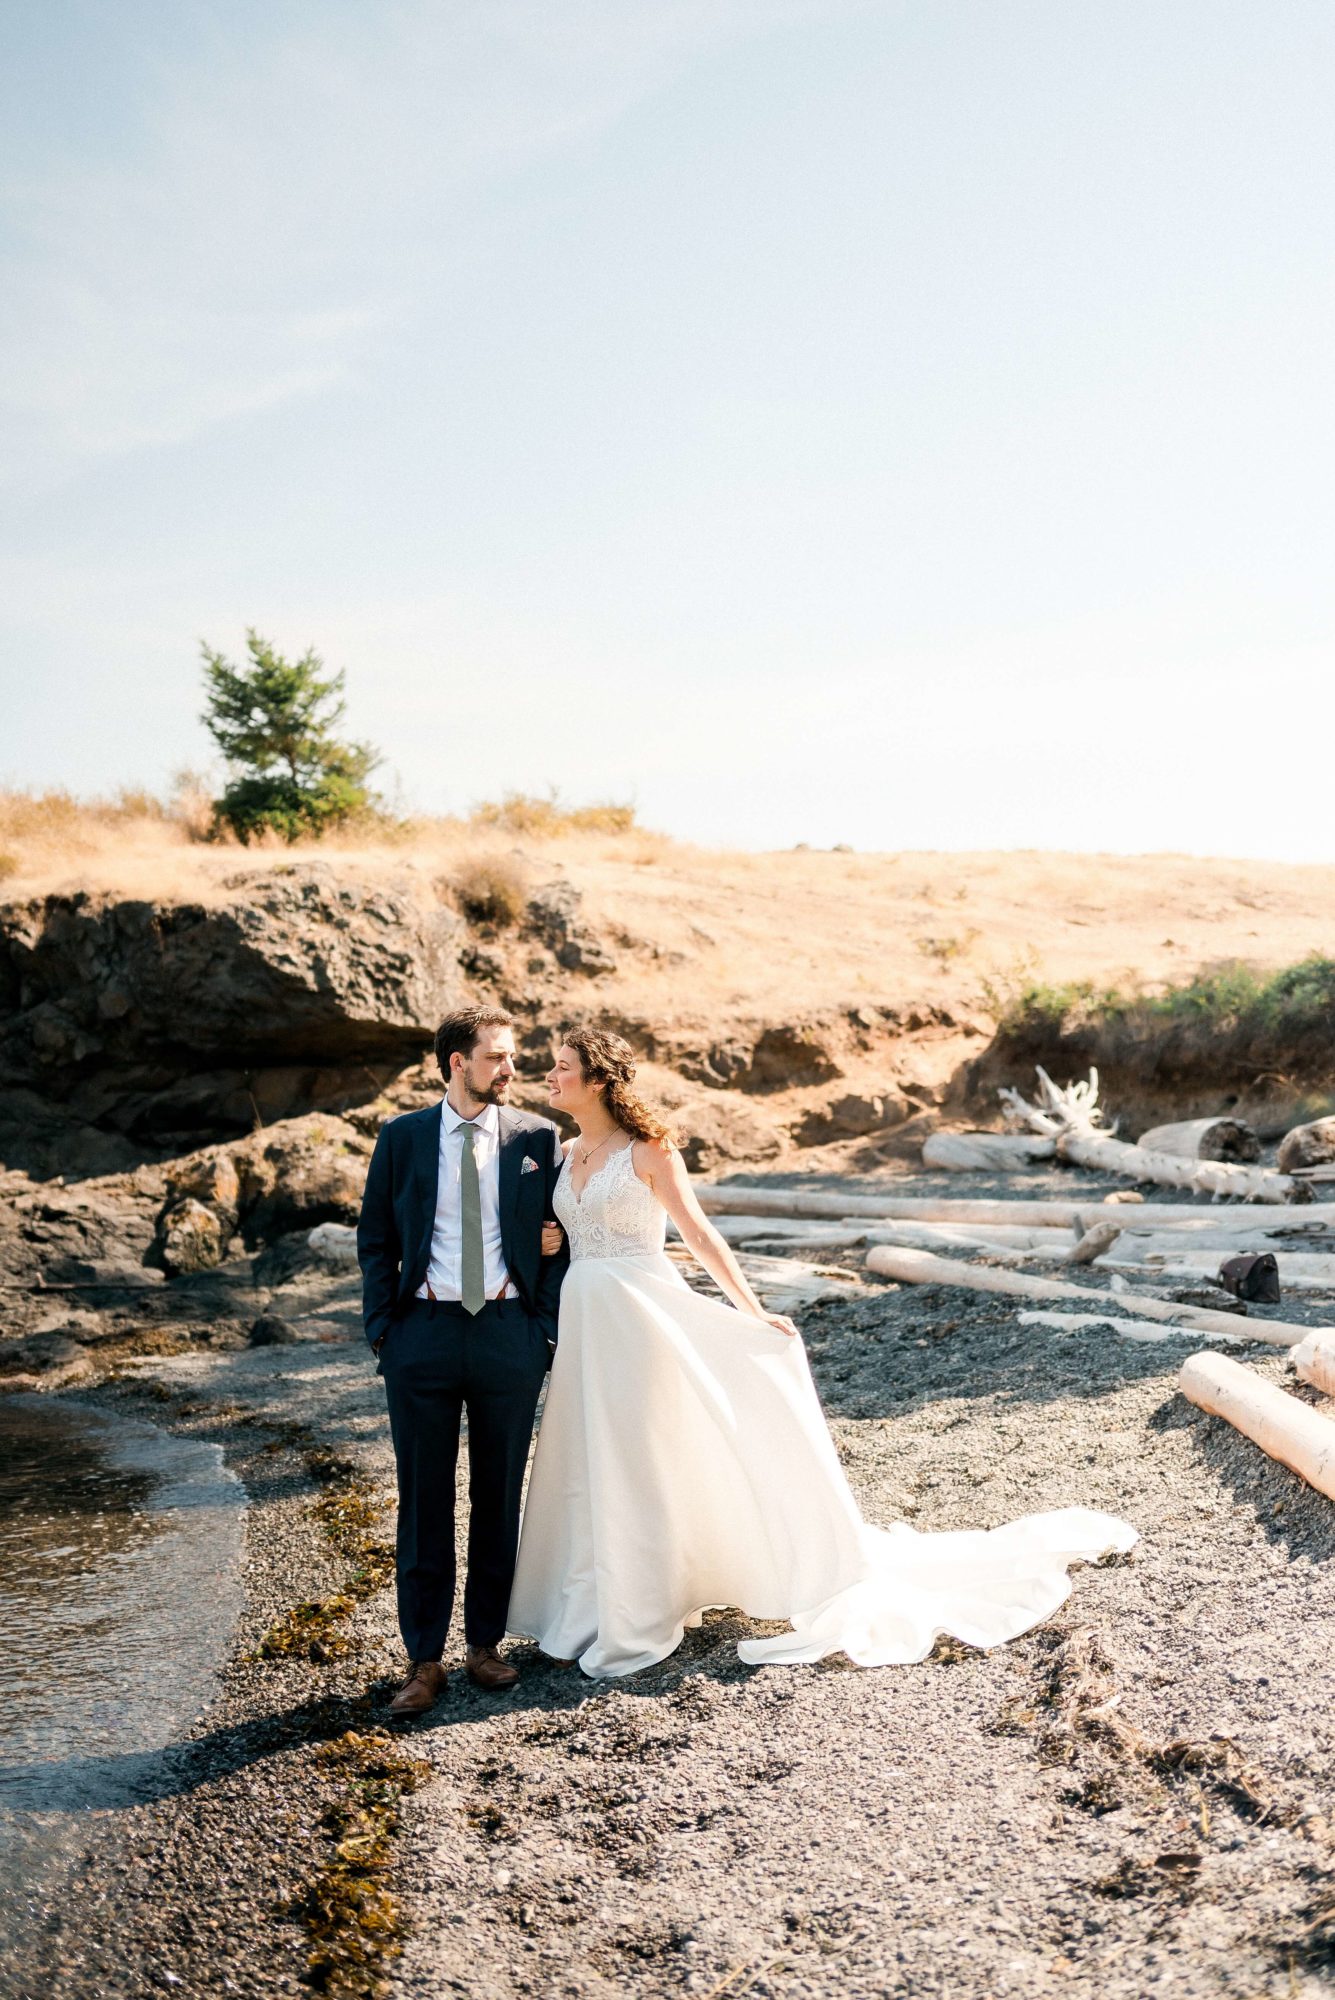 Bride and groom kissing on a rocky beach in the San Juan Islands